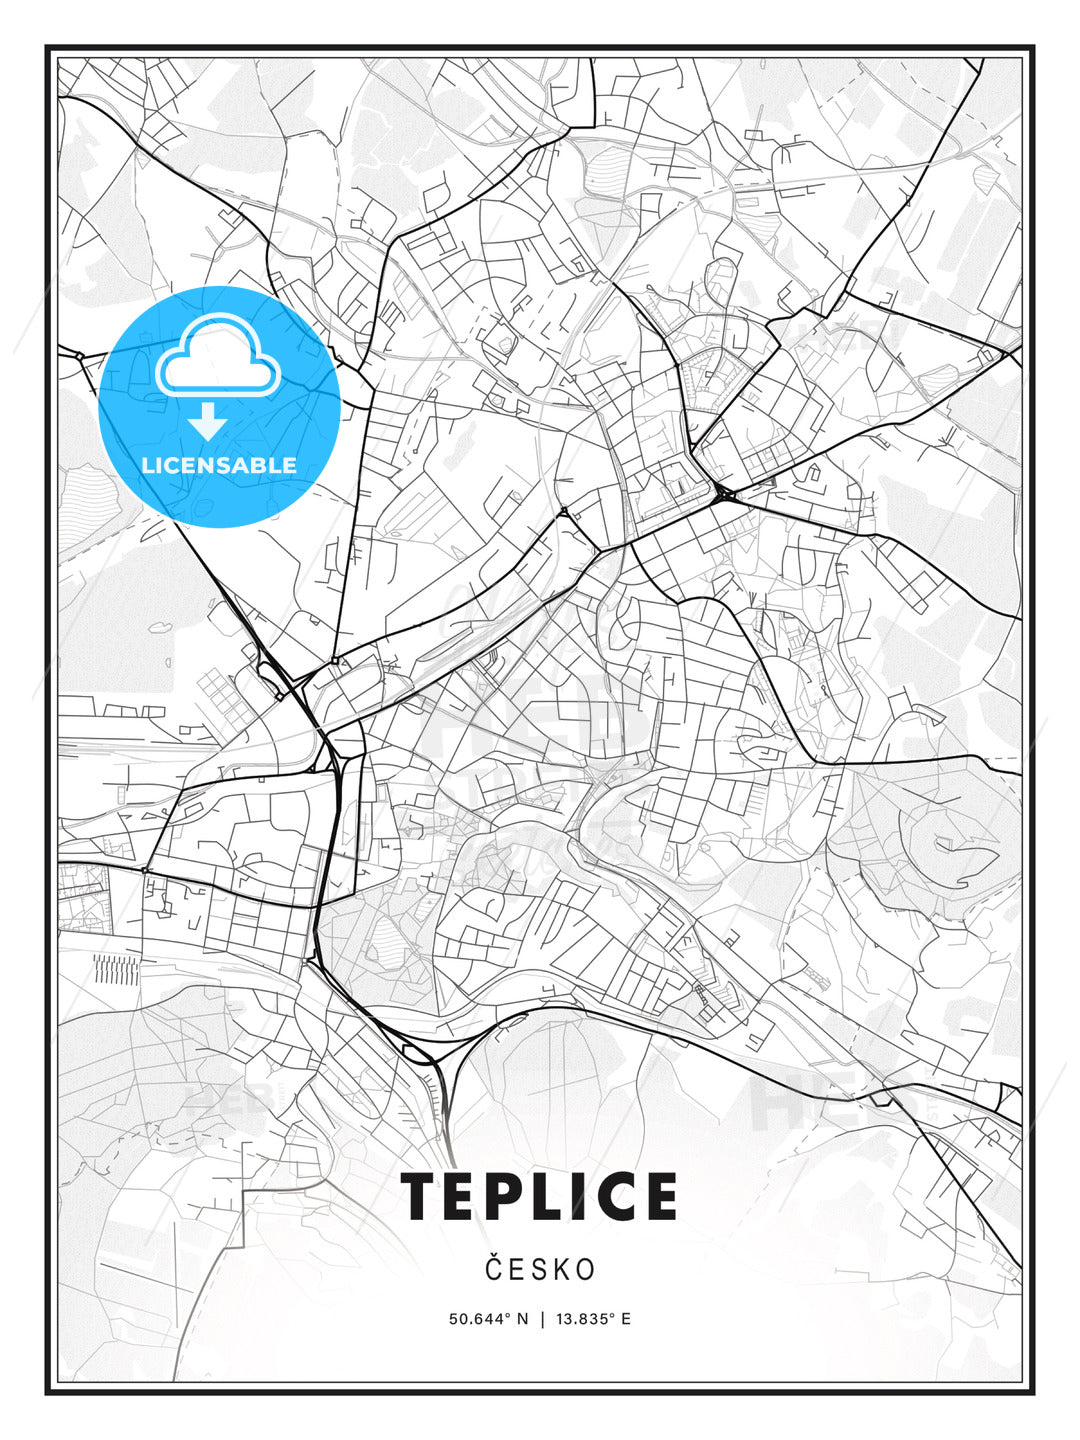 Teplice, Czechia, Modern Print Template in Various Formats - HEBSTREITS Sketches